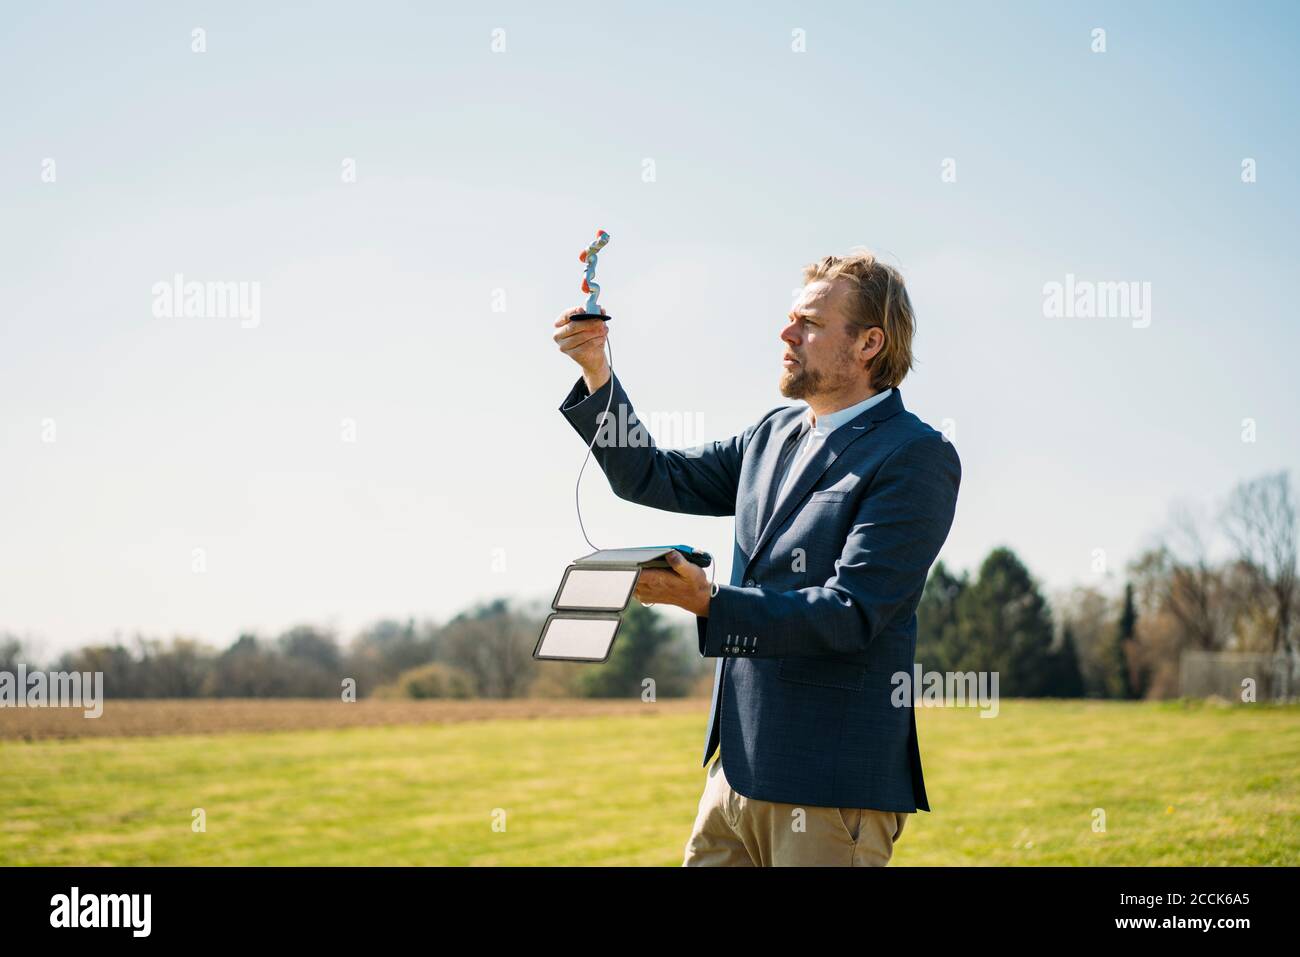 Engineer analyzing robot arm while charging with portable solar panel against clear sky on sunny day Stock Photo